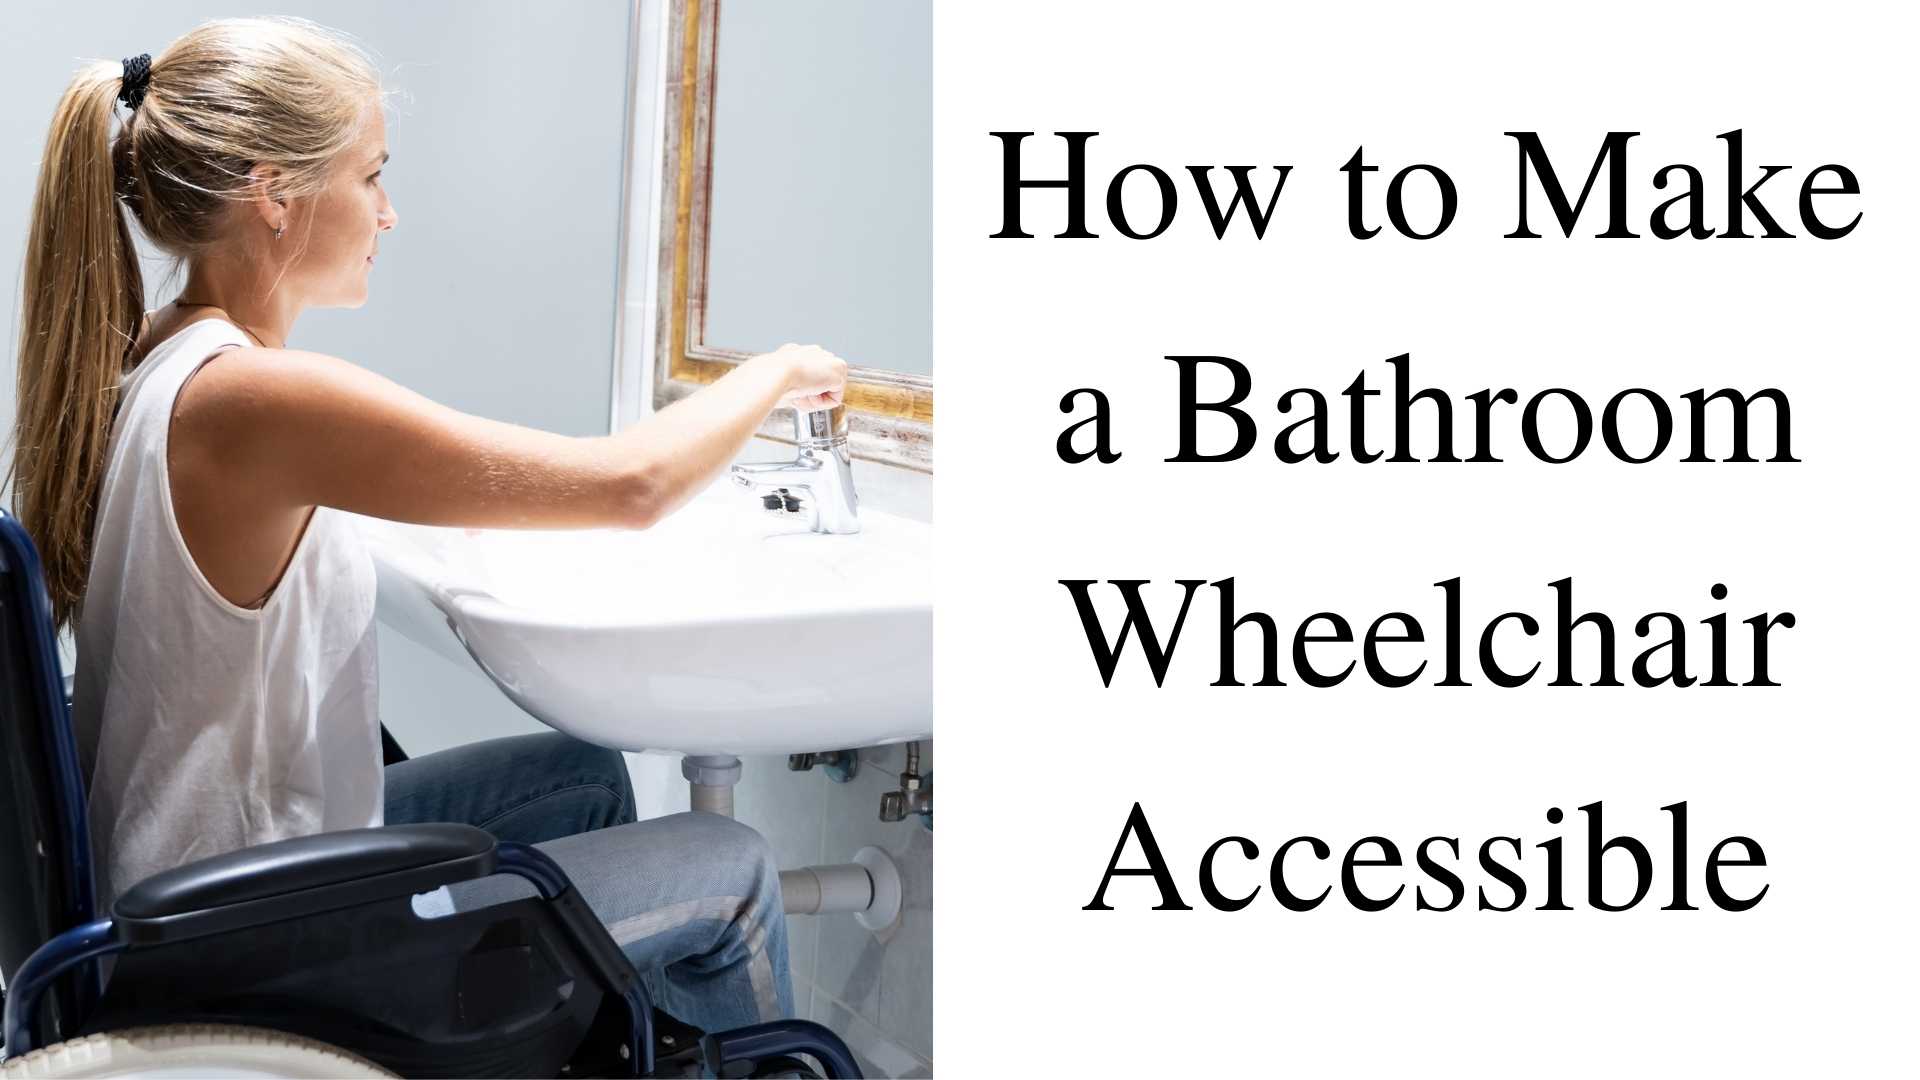 How to Make a Bathroom Wheelchair Accessible Feature Image